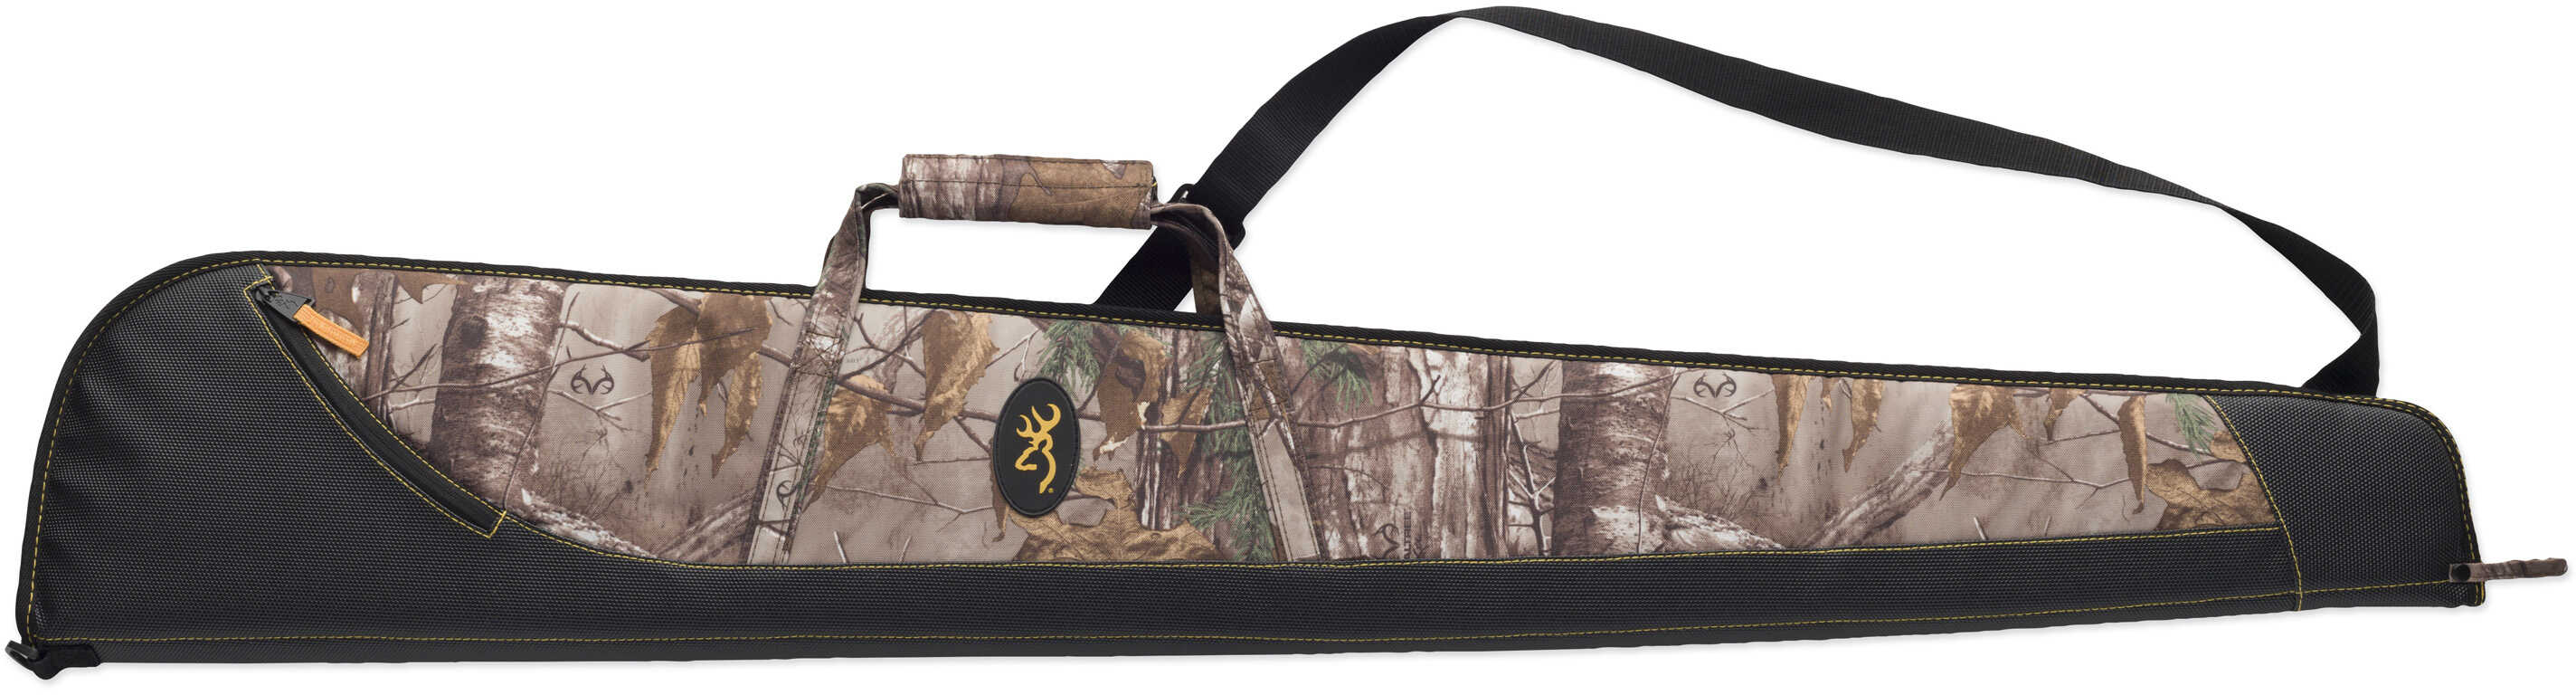 Browning Rugged Flex Rifle Case 52", Realtree Xtra/Black Md: 1419502452